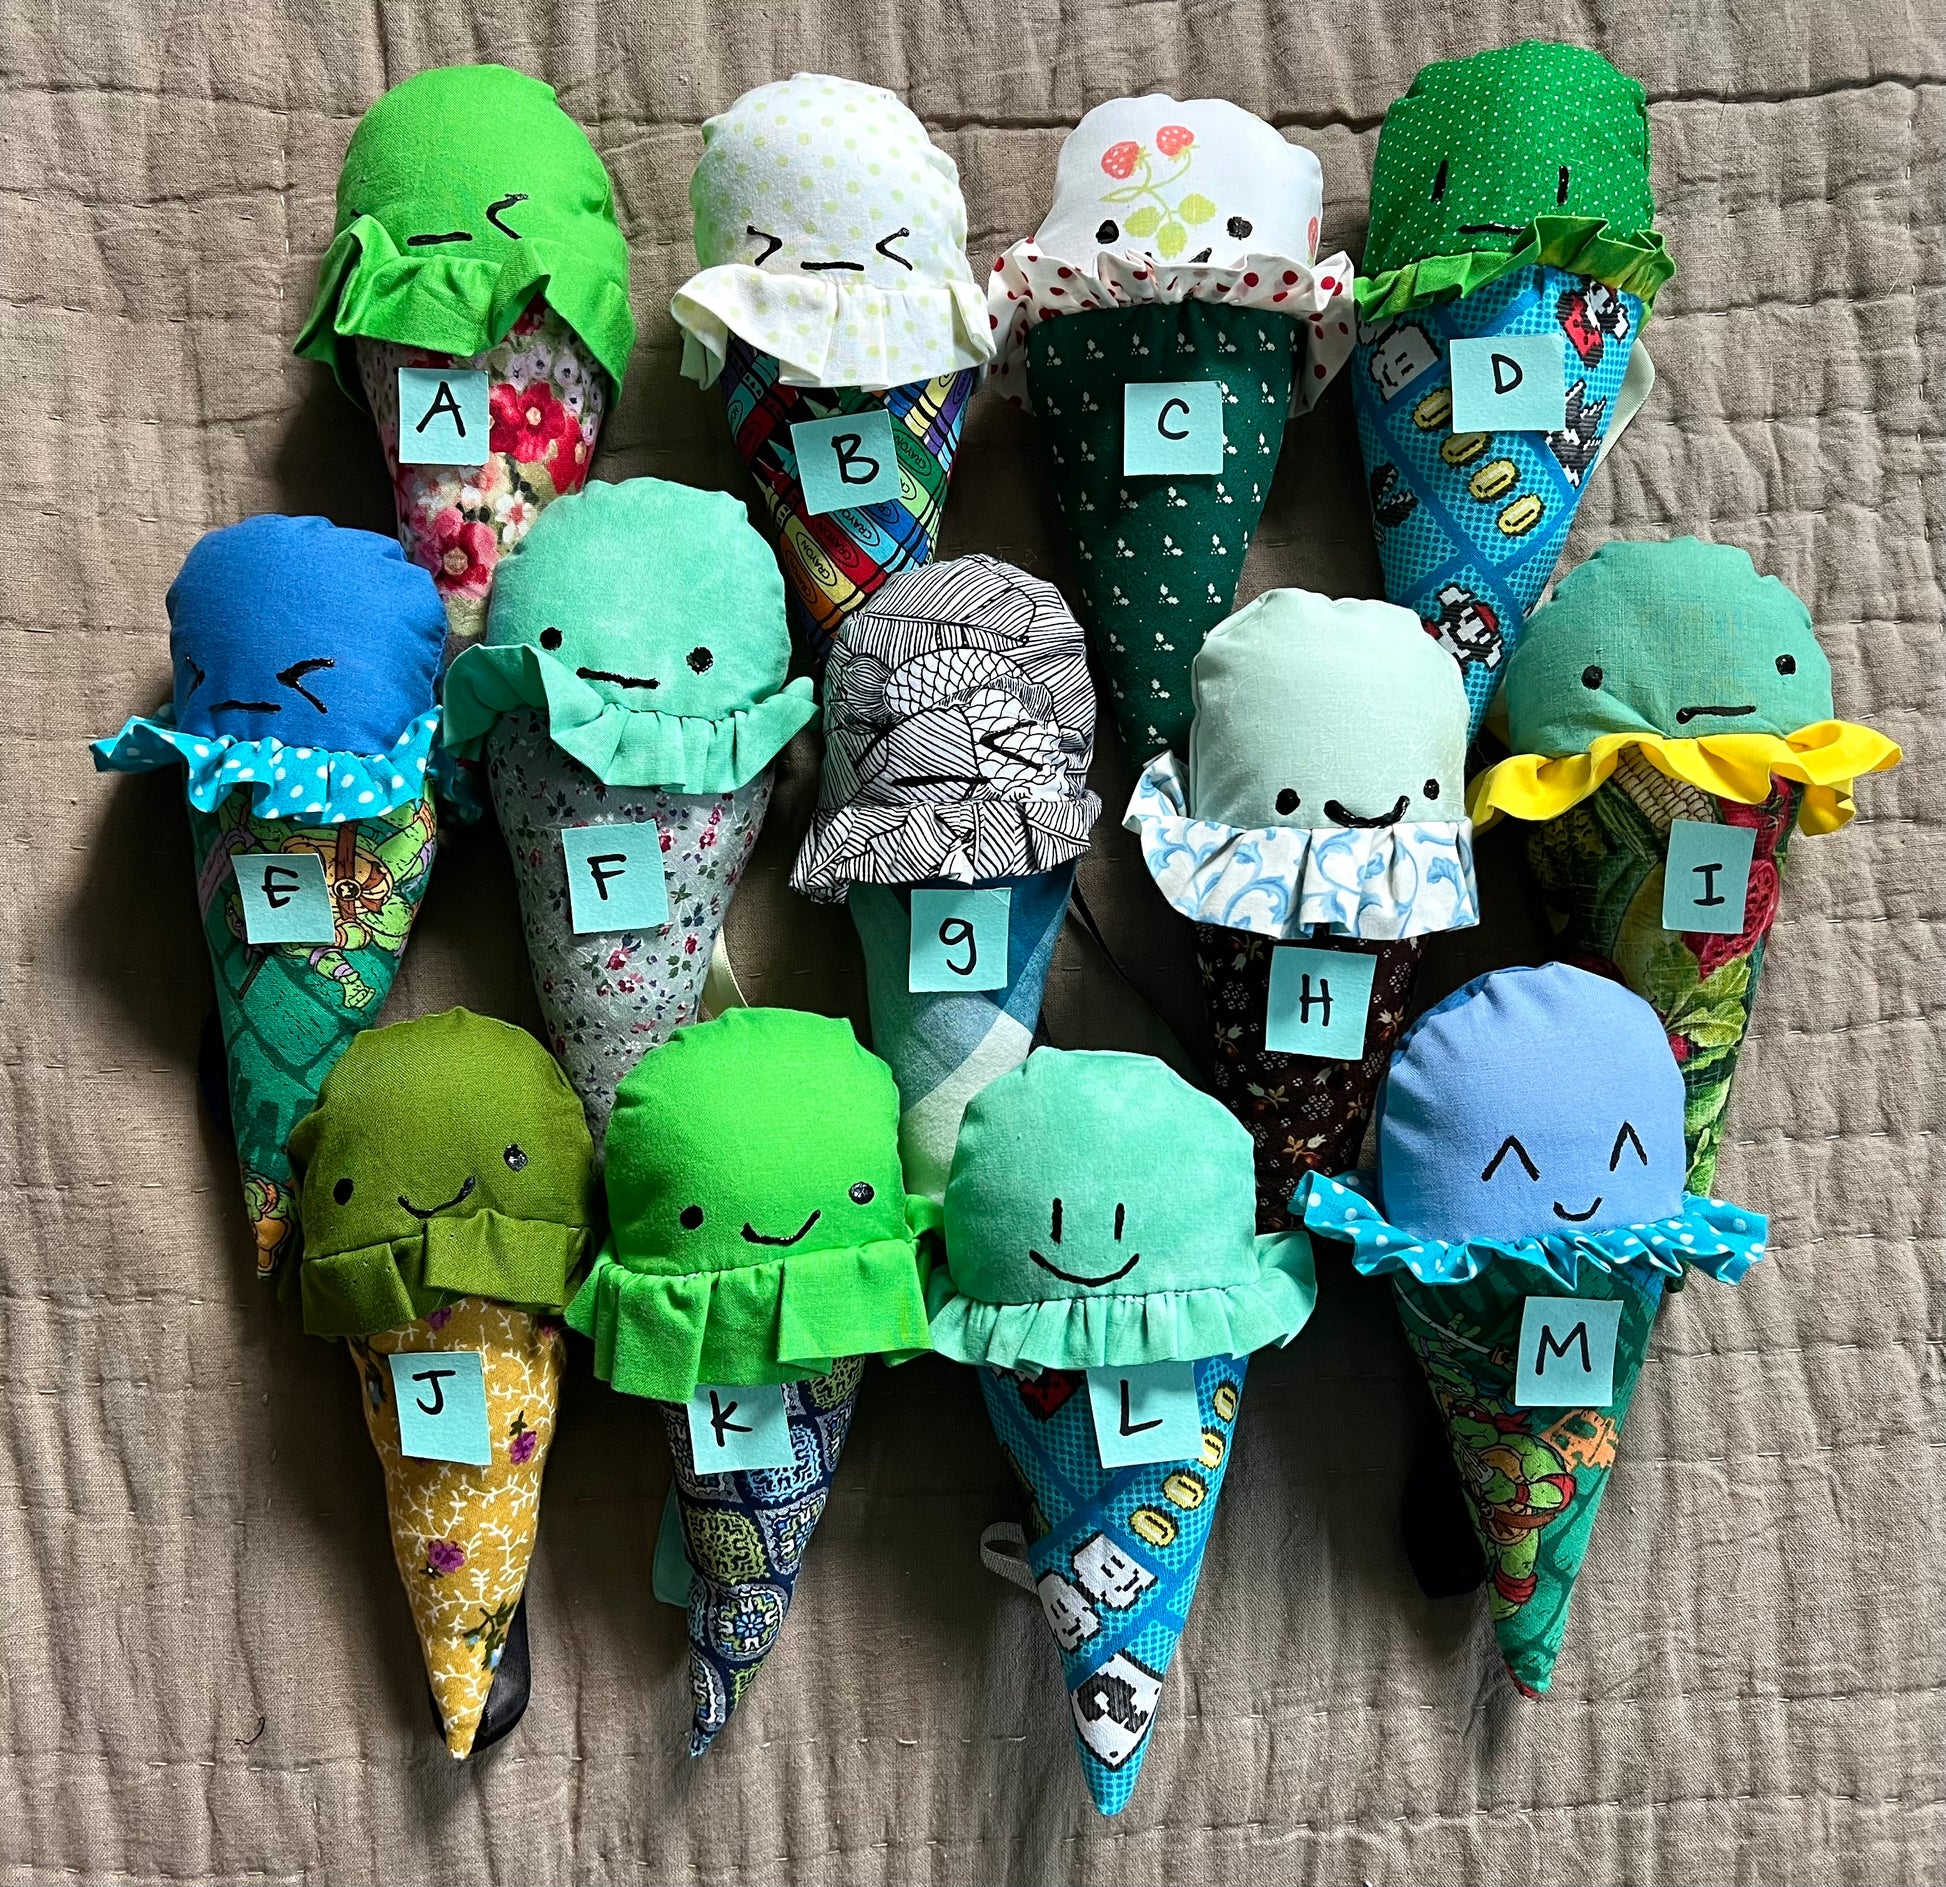 A group of colorful ice cream cone plushies, all lined up next to each other with coordinating letters on top of each one for easy selection.